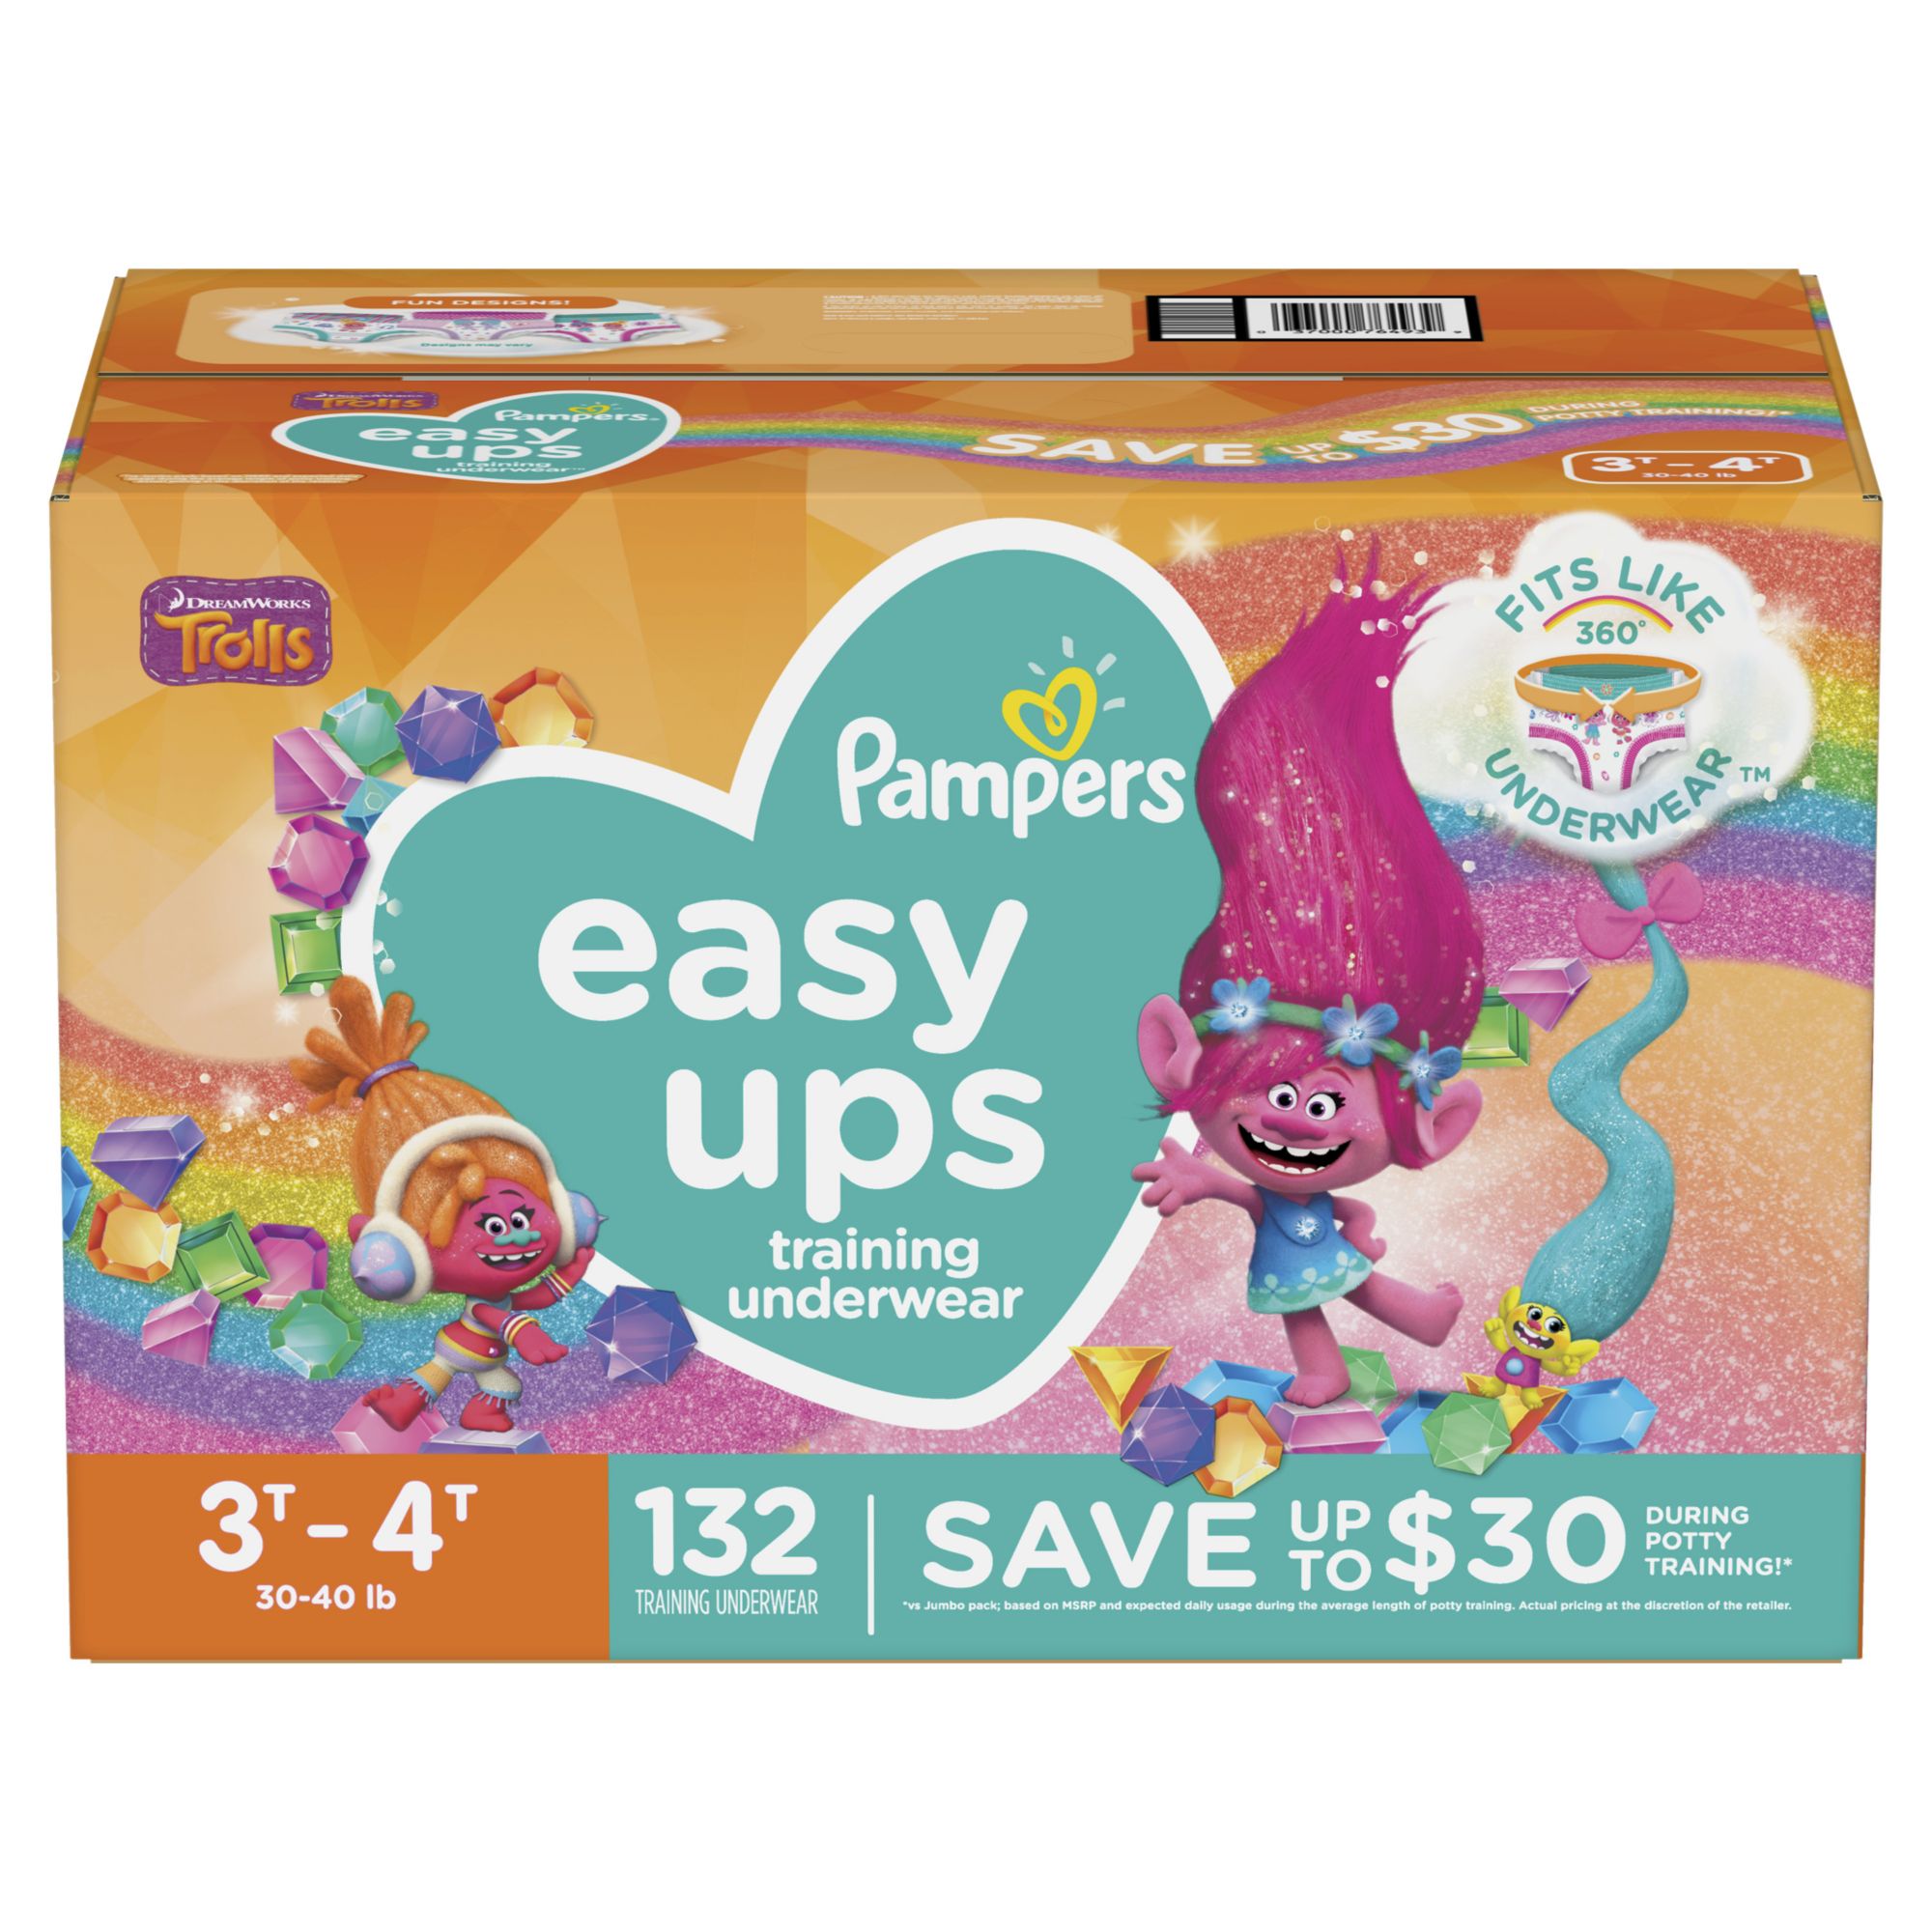 Pampers Easy Ups Printable Coupon Printable Coupons And Deals